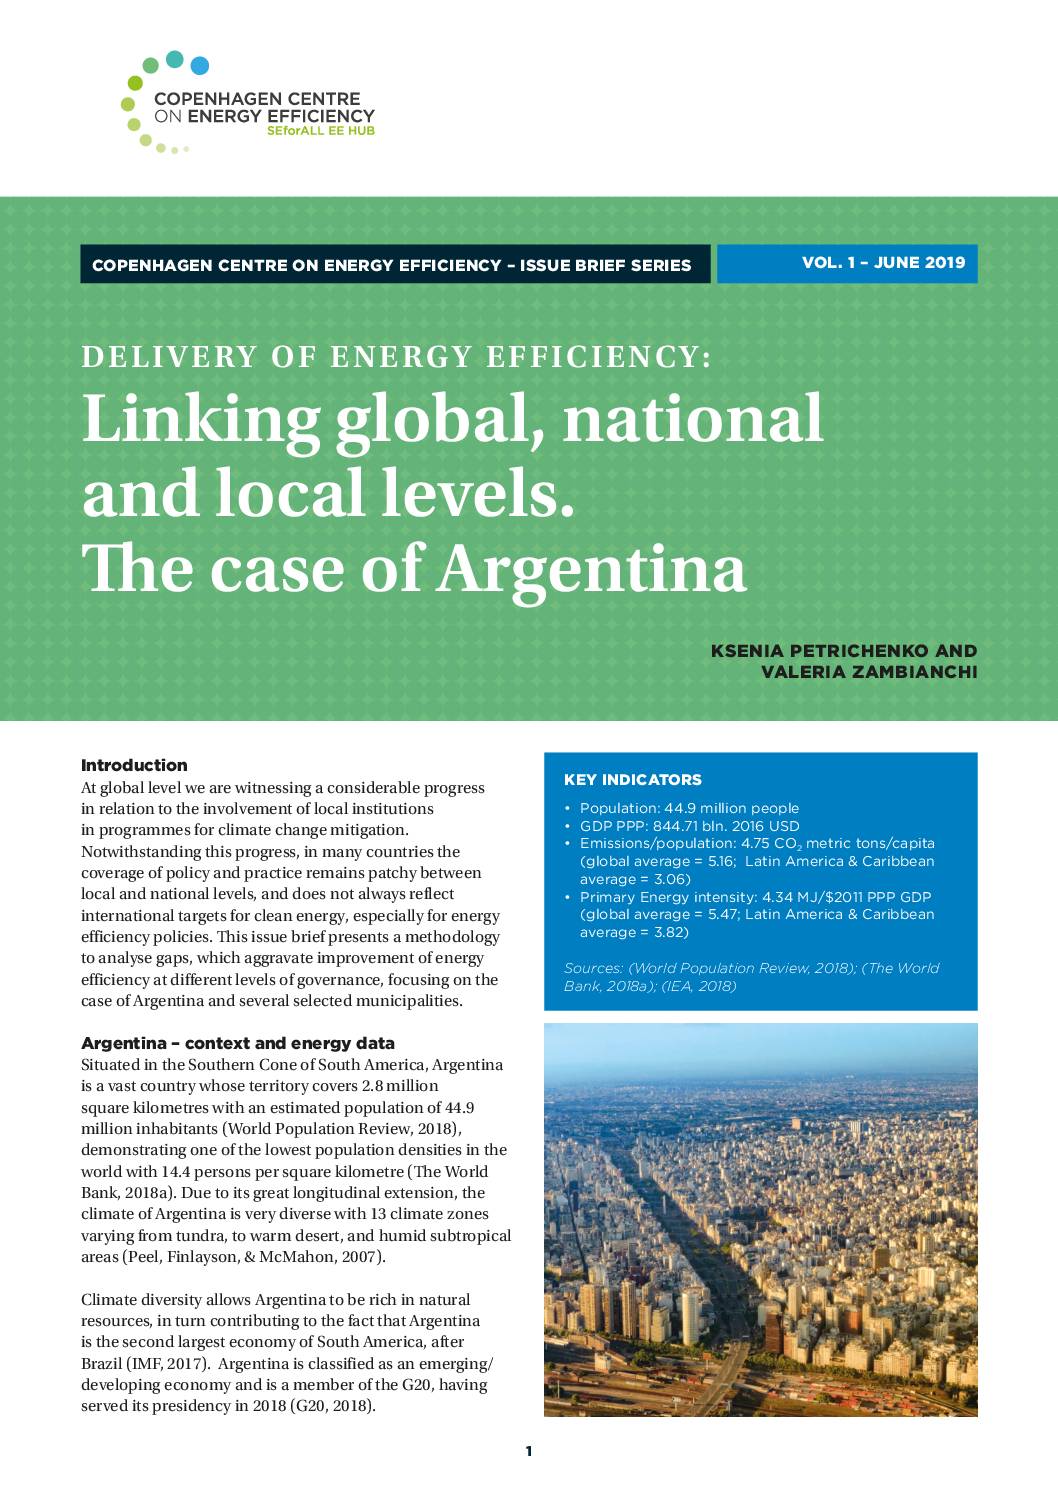 Delivery of Energy Efficiency: Linking global, national and local levels. The case of Argentina